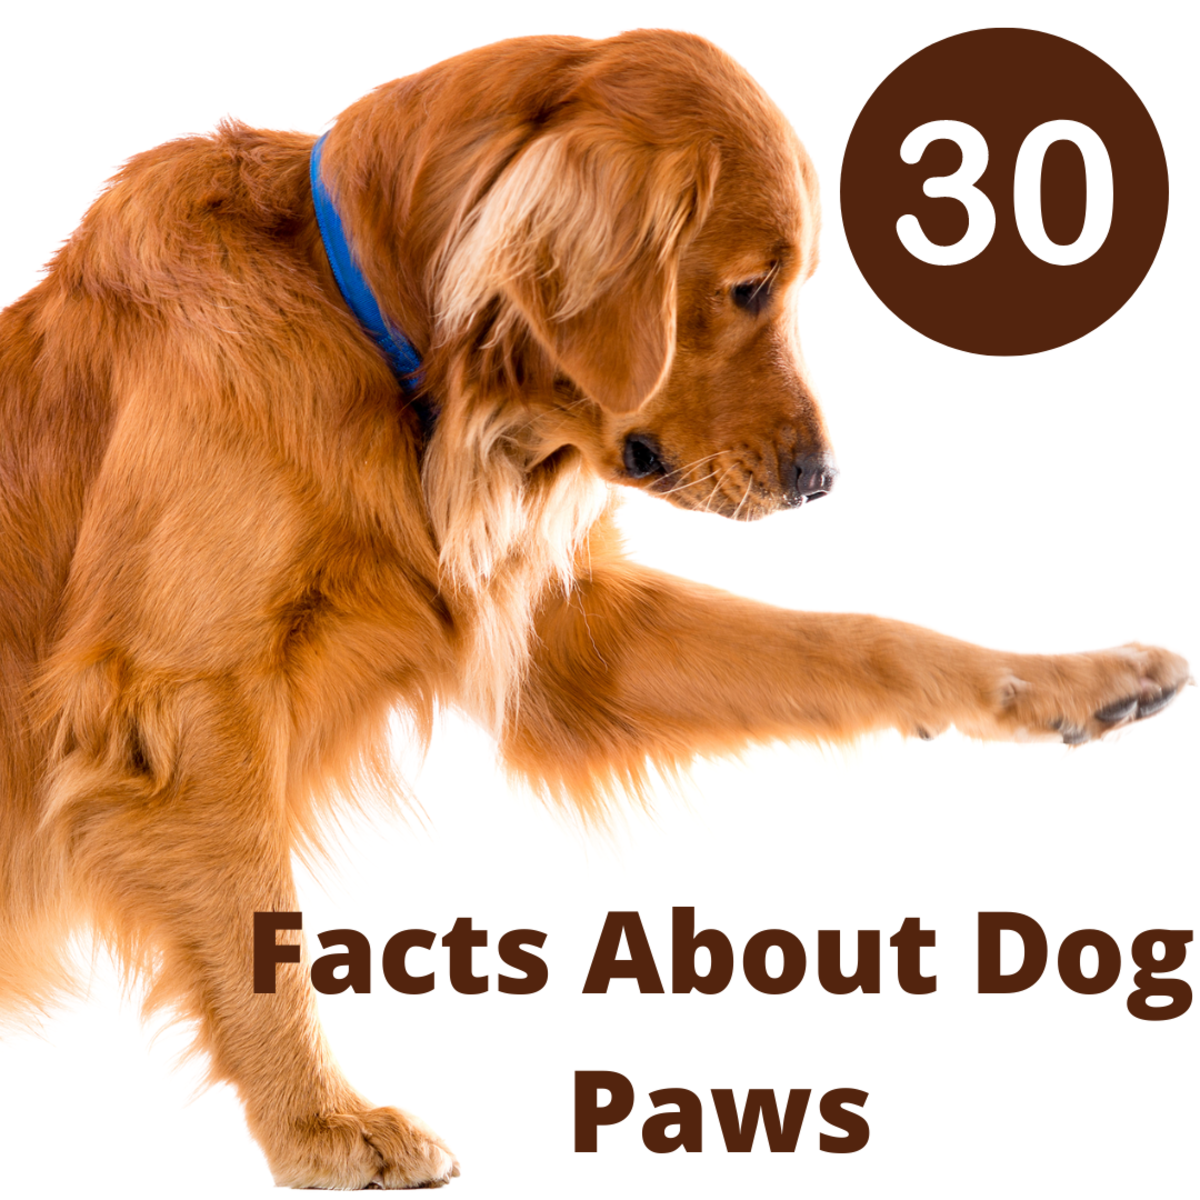 30 Fascinating Facts About Dog Paws